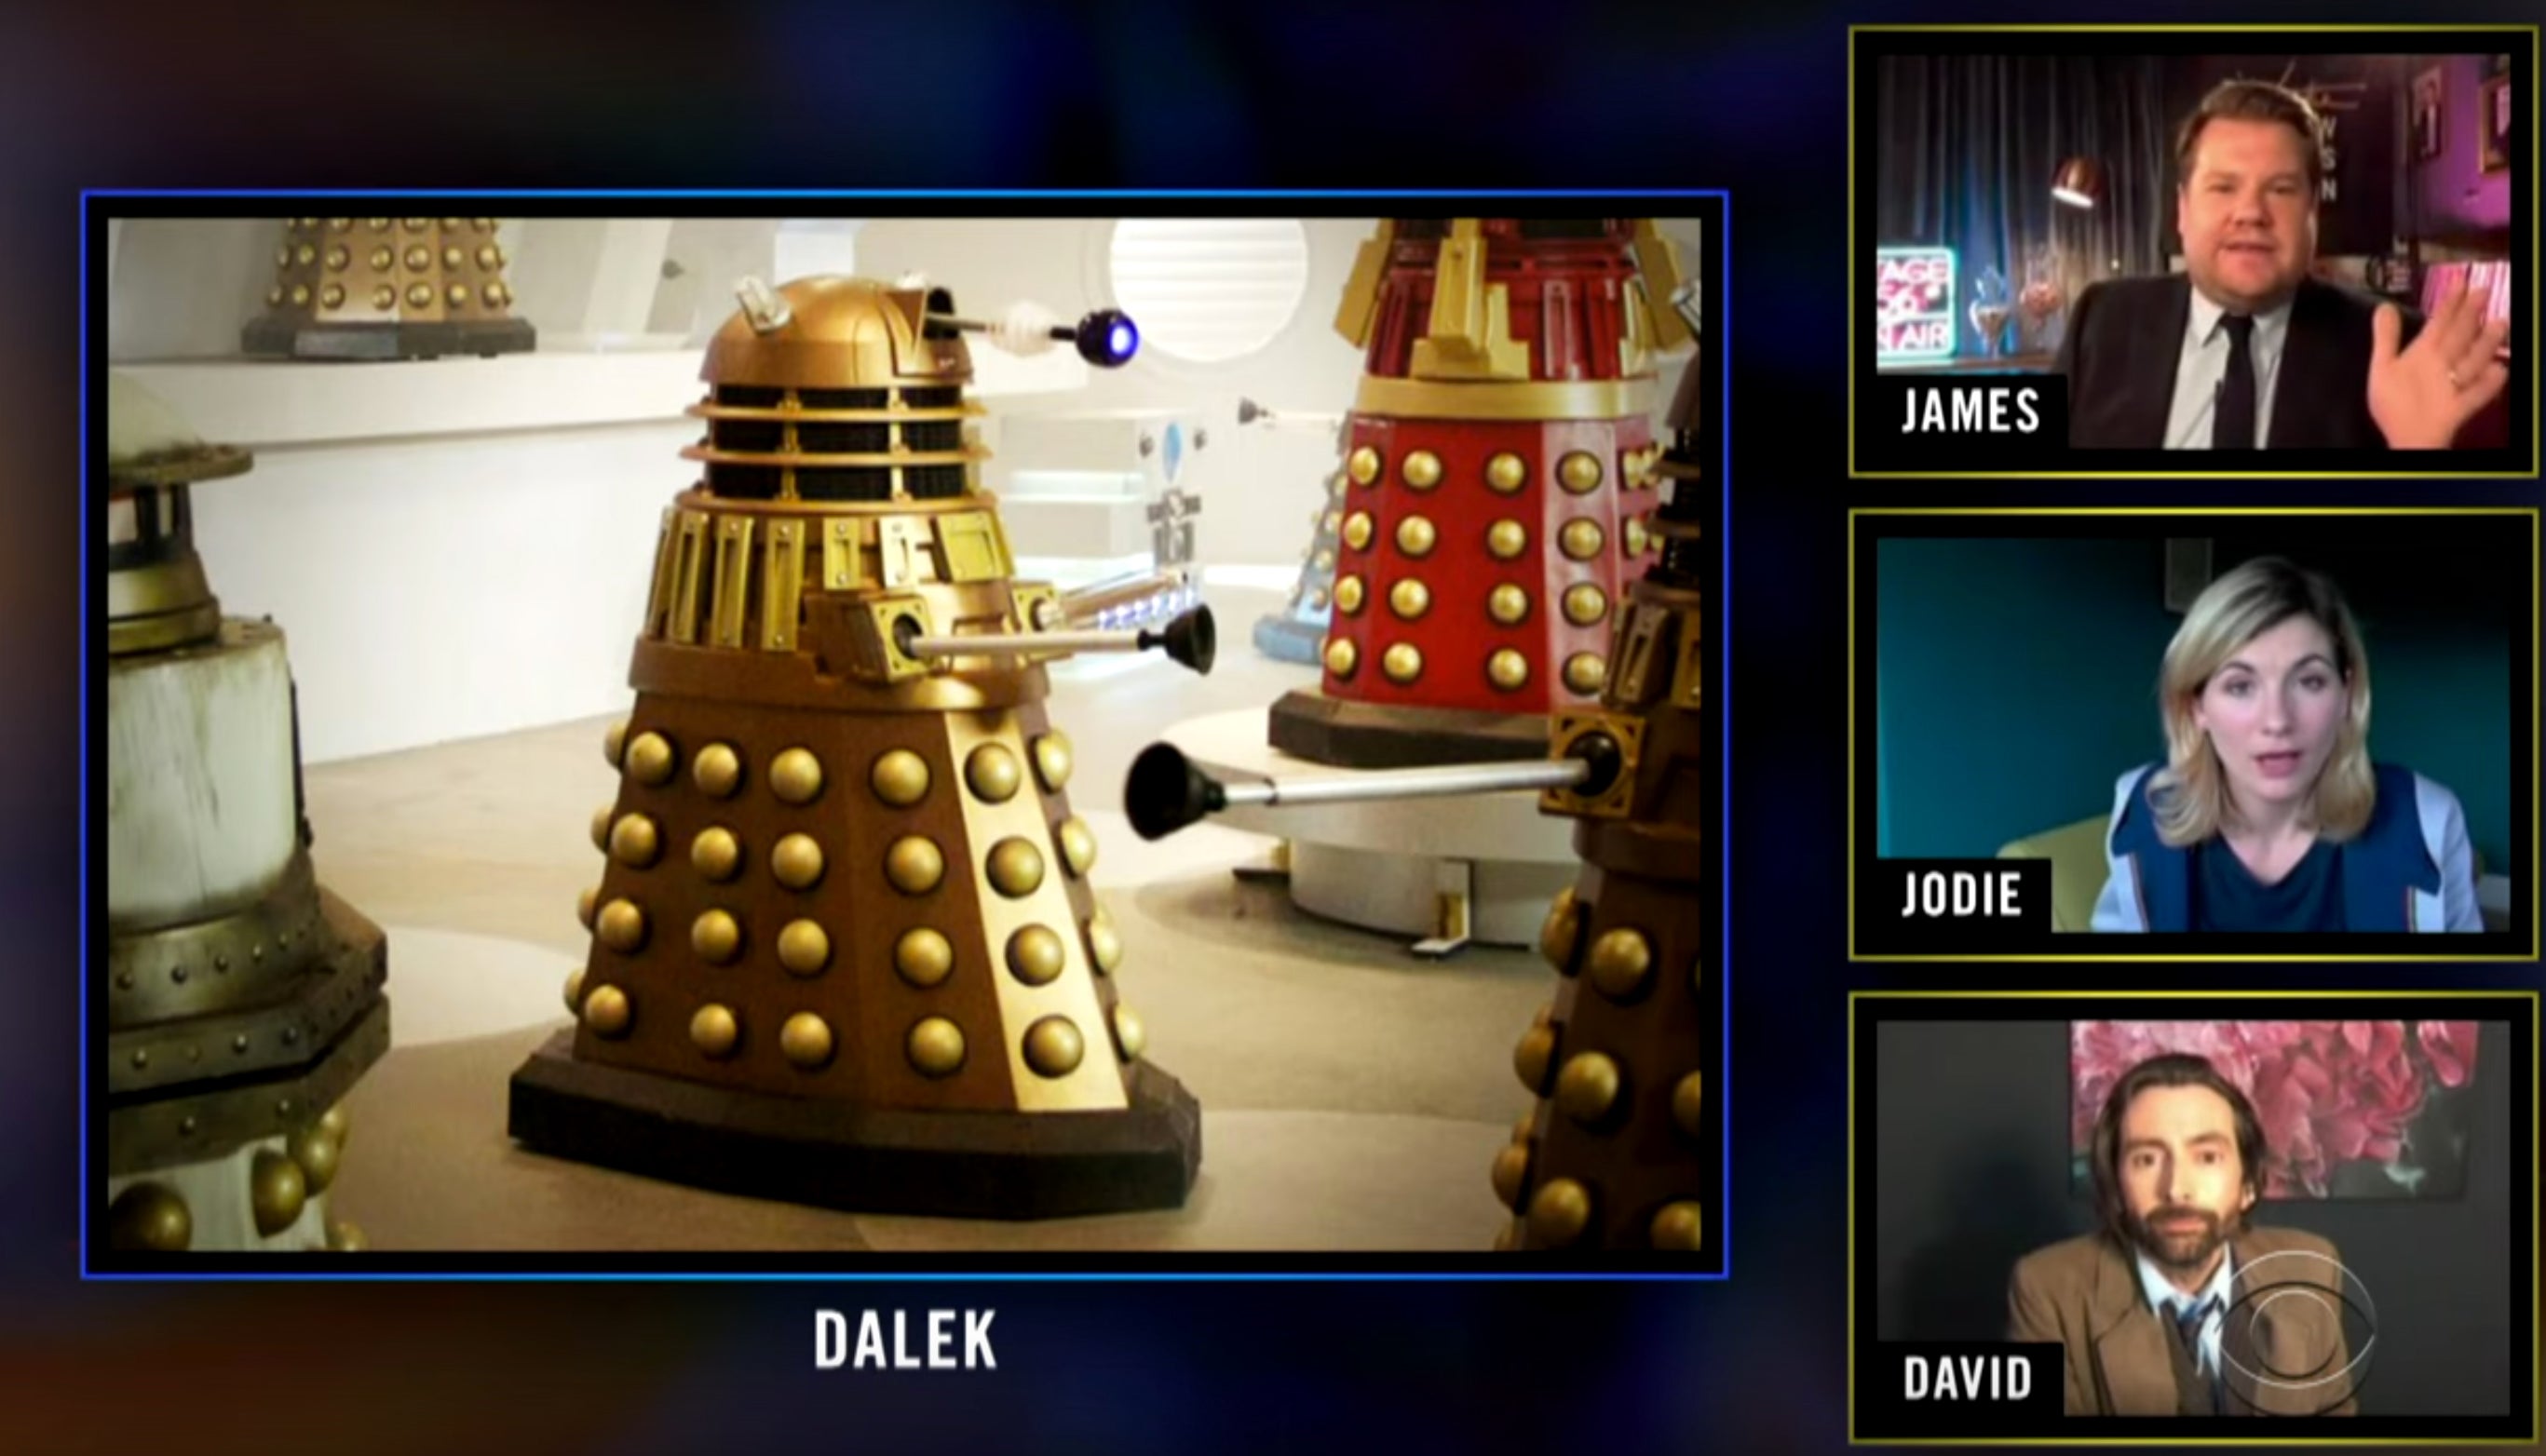 Doctor Who cosplay competion on James Corden's late-night series